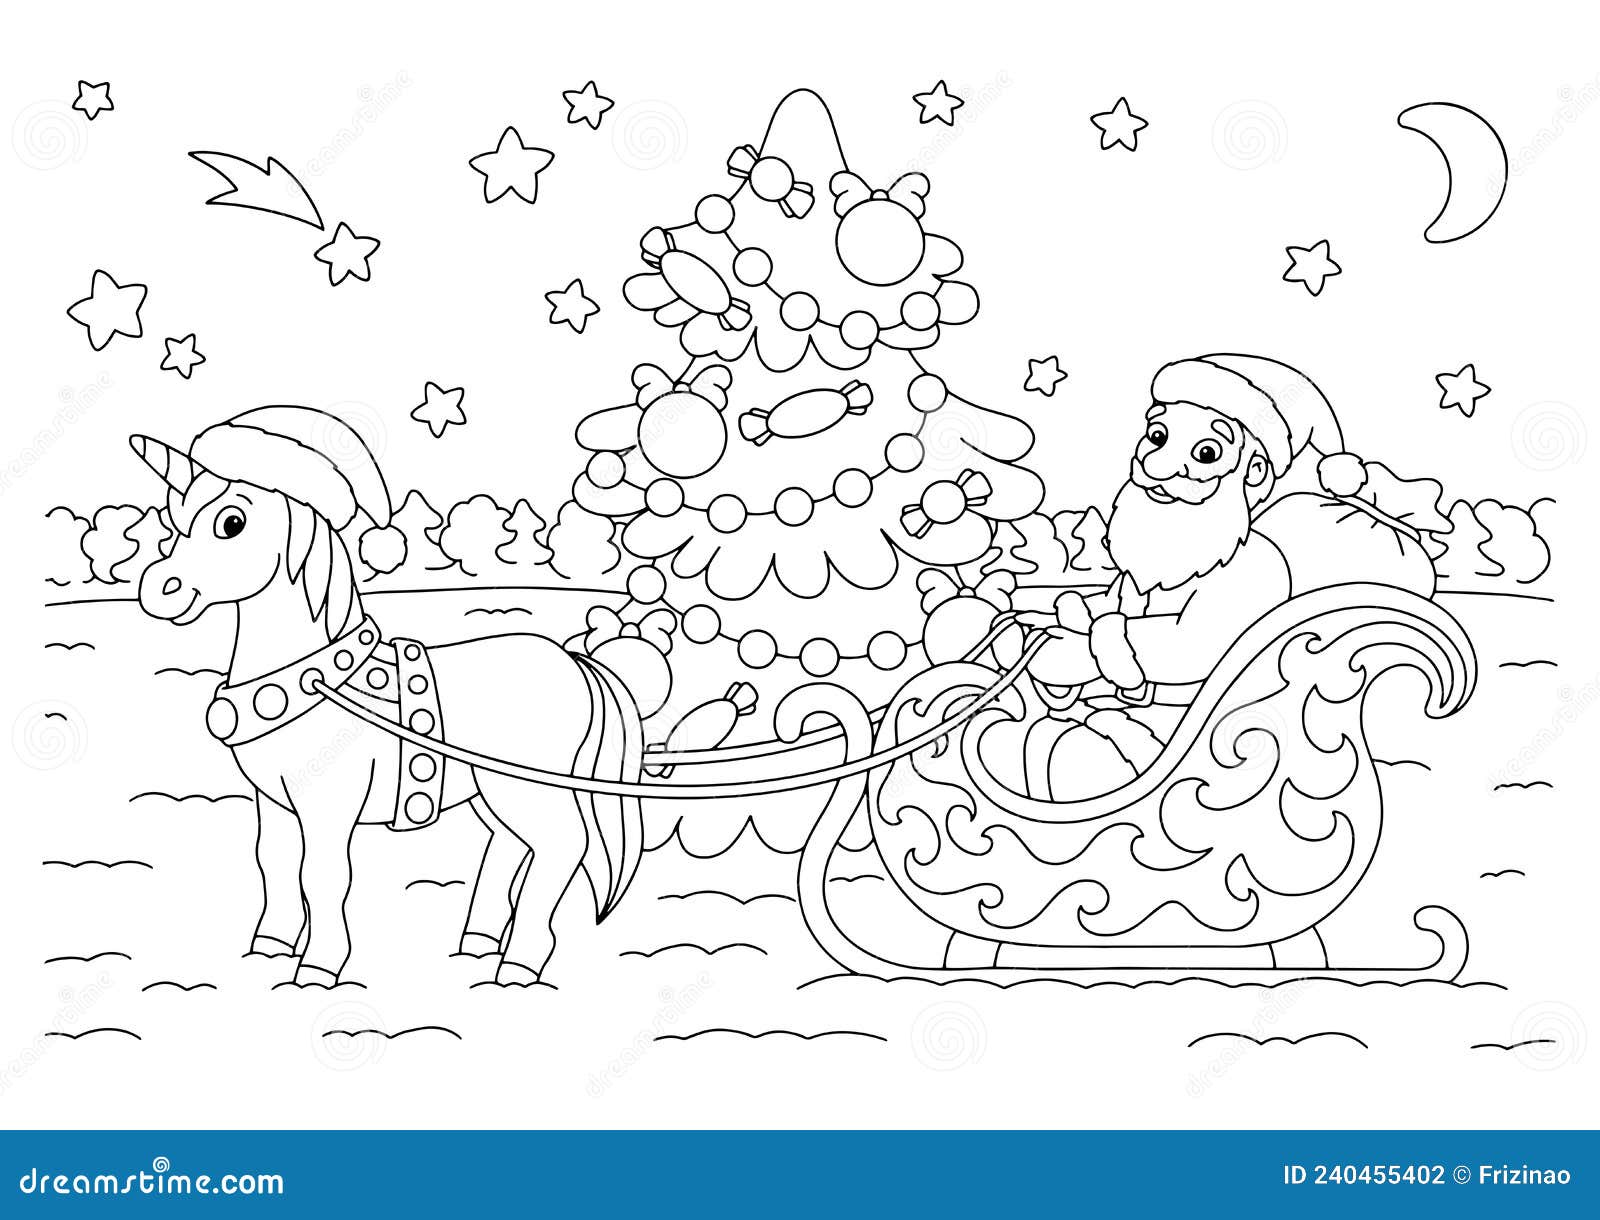 Unicorn christmas coloring page stock illustrations â unicorn christmas coloring page stock illustrations vectors clipart